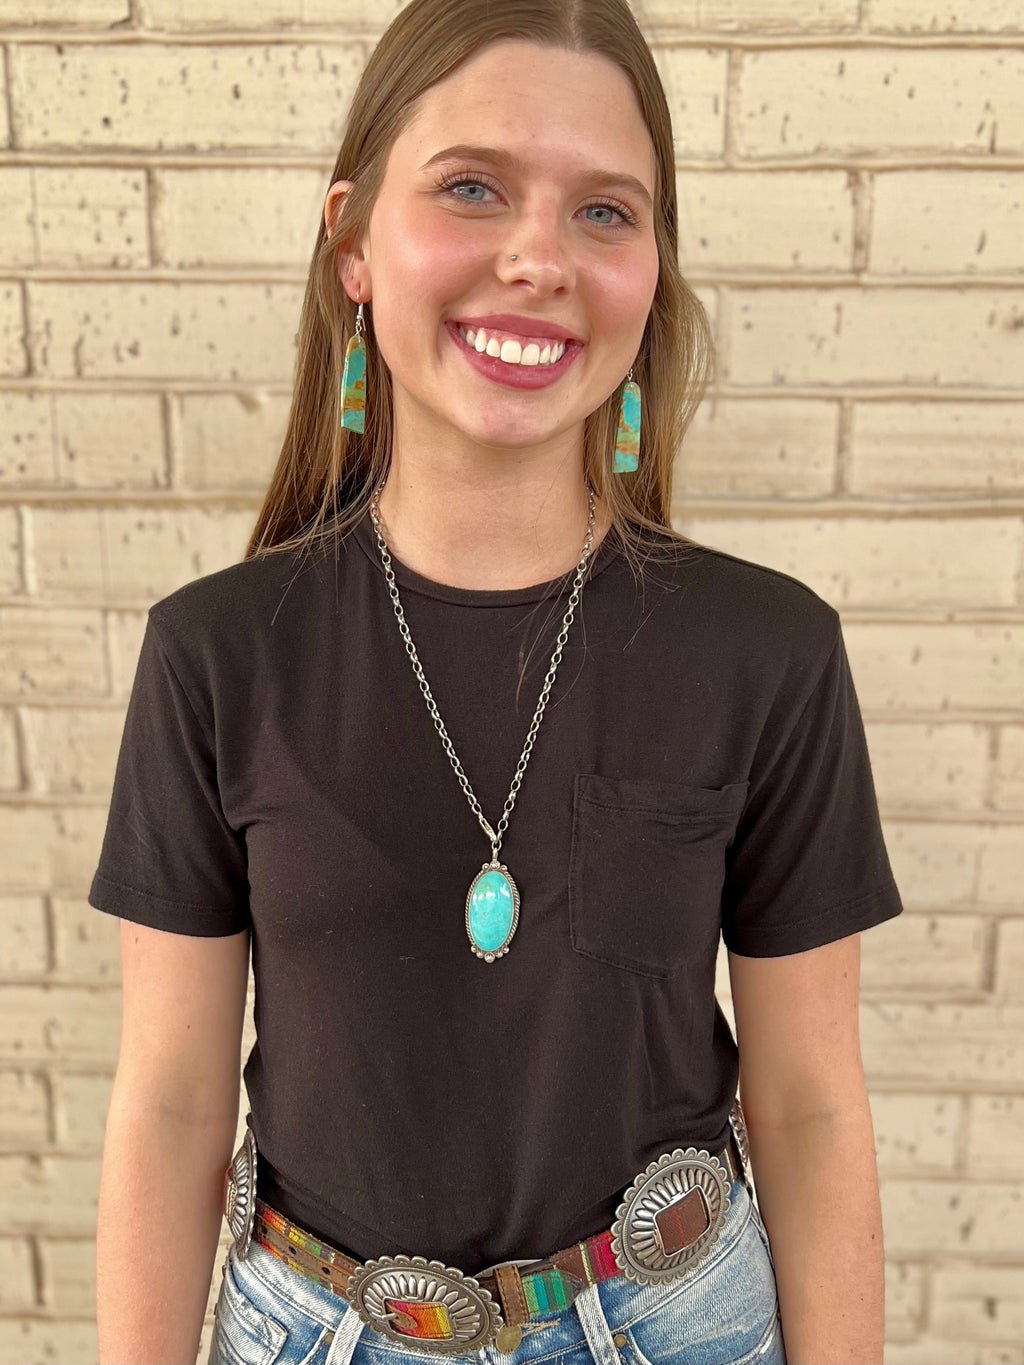 Genuine sterling silver necklace and authentic turquoise stone. Handmade by a Native of the Navajo tribes. High quality and long lasting.